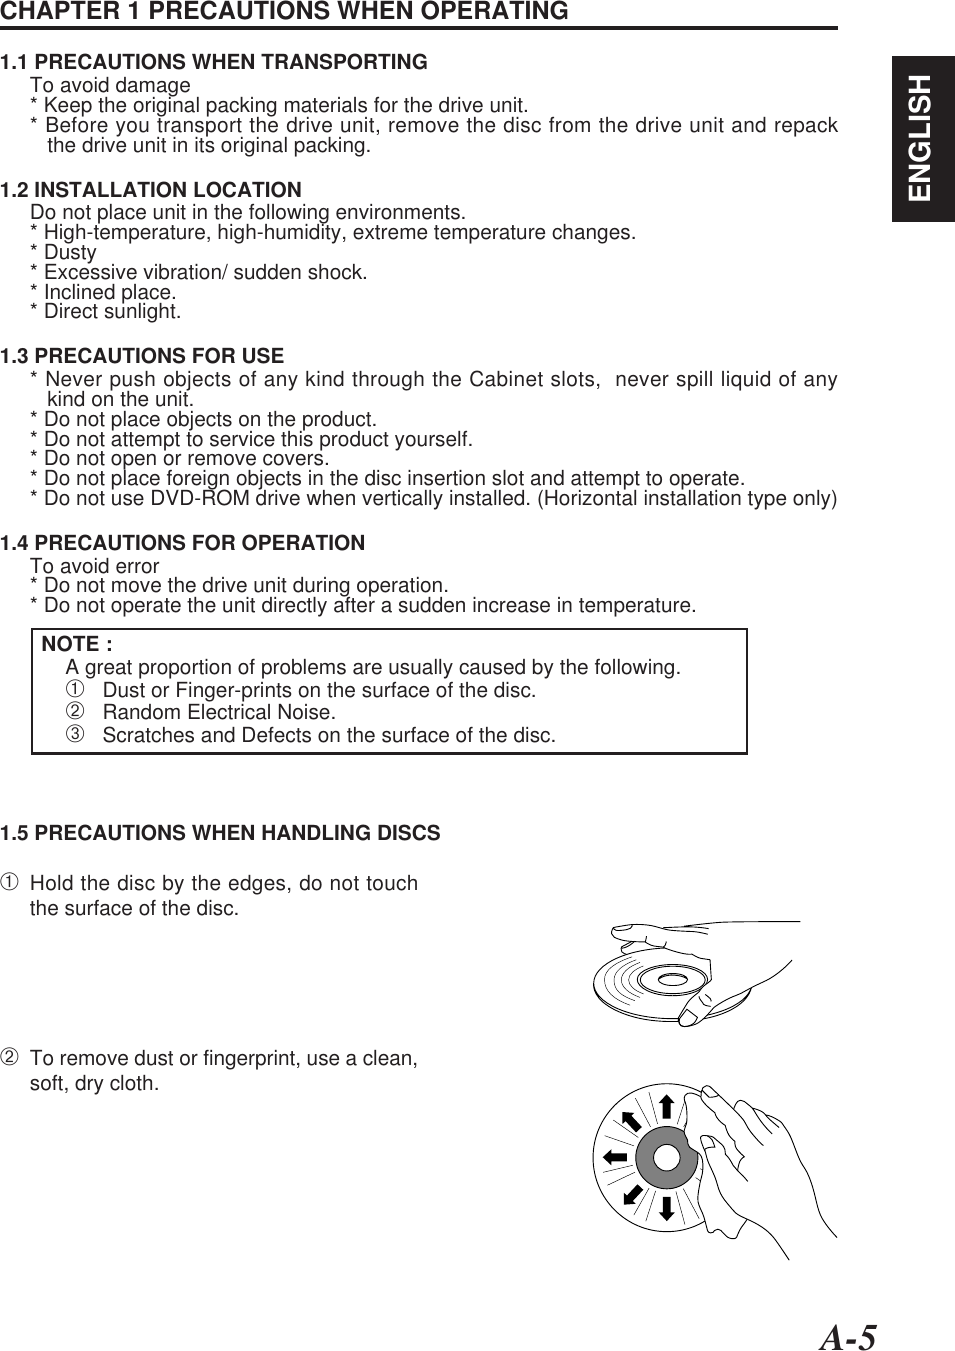 A-5ENGLISHCHAPTER 1 PRECAUTIONS WHEN OPERATING1.1 PRECAUTIONS WHEN TRANSPORTINGTo avoid damage* Keep the original packing materials for the drive unit.* Before you transport the drive unit, remove the disc from the drive unit and repack   the drive unit in its original packing.1.2 INSTALLATION LOCATIONDo not place unit in the following environments.* High-temperature, high-humidity, extreme temperature changes.* Dusty* Excessive vibration/ sudden shock.* Inclined place.* Direct sunlight.1.3 PRECAUTIONS FOR USE* Never push objects of any kind through the Cabinet slots,  never spill liquid of any   kind on the unit.* Do not place objects on the product.* Do not attempt to service this product yourself.* Do not open or remove covers.* Do not place foreign objects in the disc insertion slot and attempt to operate.* Do not use DVD-ROM drive when vertically installed. (Horizontal installation type only)1.4 PRECAUTIONS FOR OPERATIONTo avoid error* Do not move the drive unit during operation.* Do not operate the unit directly after a sudden increase in temperature.NOTE :A great proportion of problems are usually caused by the following.➀   Dust or Finger-prints on the surface of the disc.➁   Random Electrical Noise.➂   Scratches and Defects on the surface of the disc.1.5 PRECAUTIONS WHEN HANDLING DISCS➀Hold the disc by the edges, do not touchthe surface of the disc.➁To remove dust or fingerprint, use a clean,soft, dry cloth.